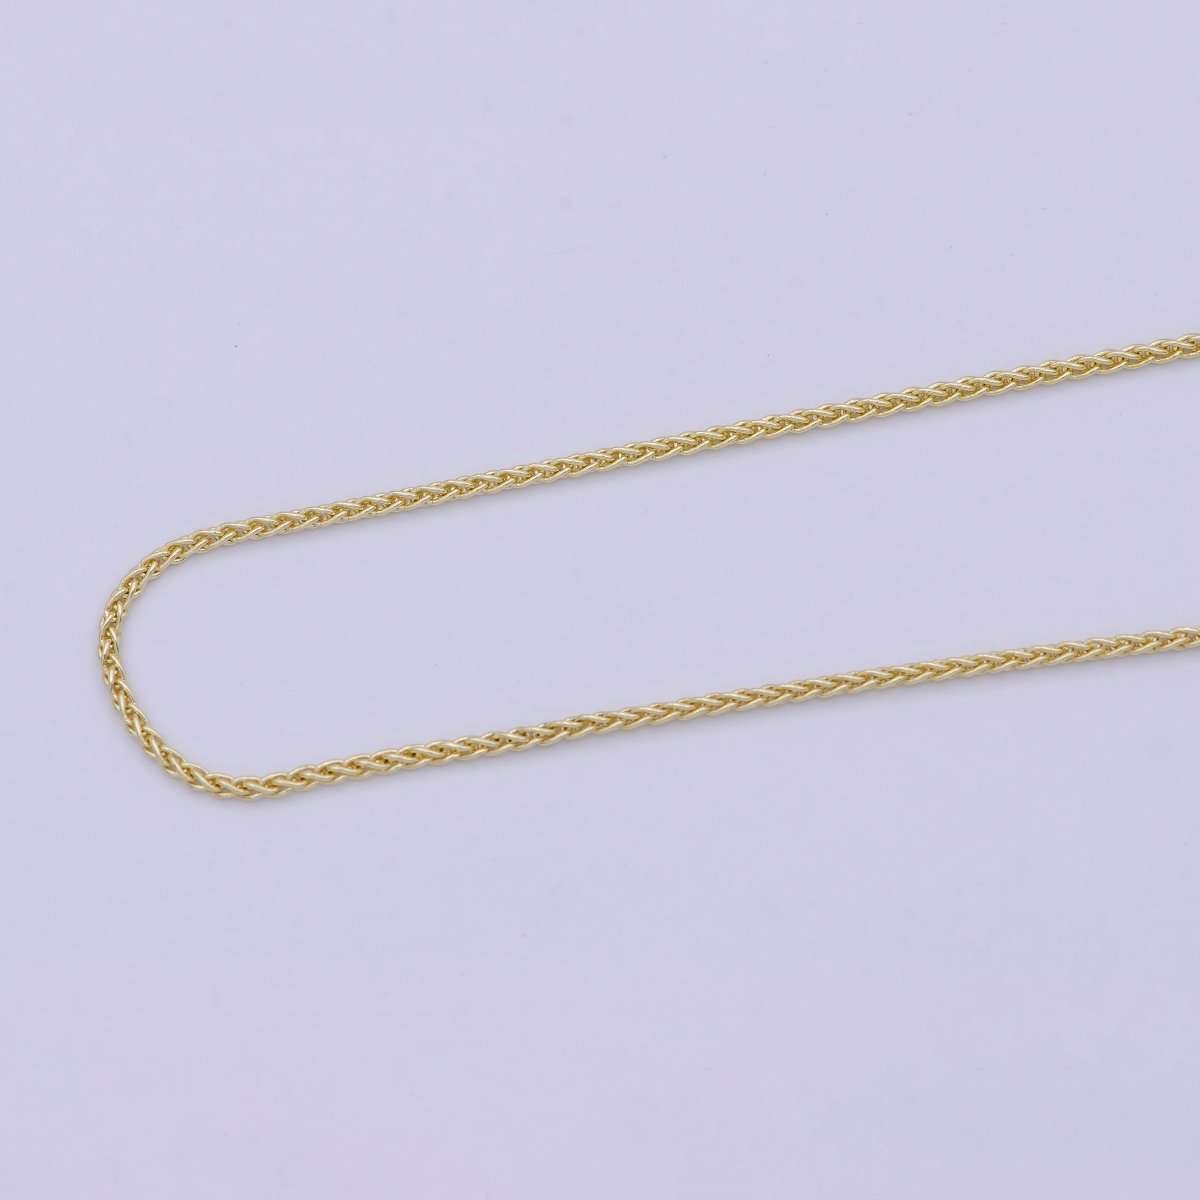 14K Gold Filled Wheat Chain Foxtail Chain Necklace, Man Ladies Gold Chain, Trending Gold Chain Necklace | WA-755 Clearance Pricing - DLUXCA